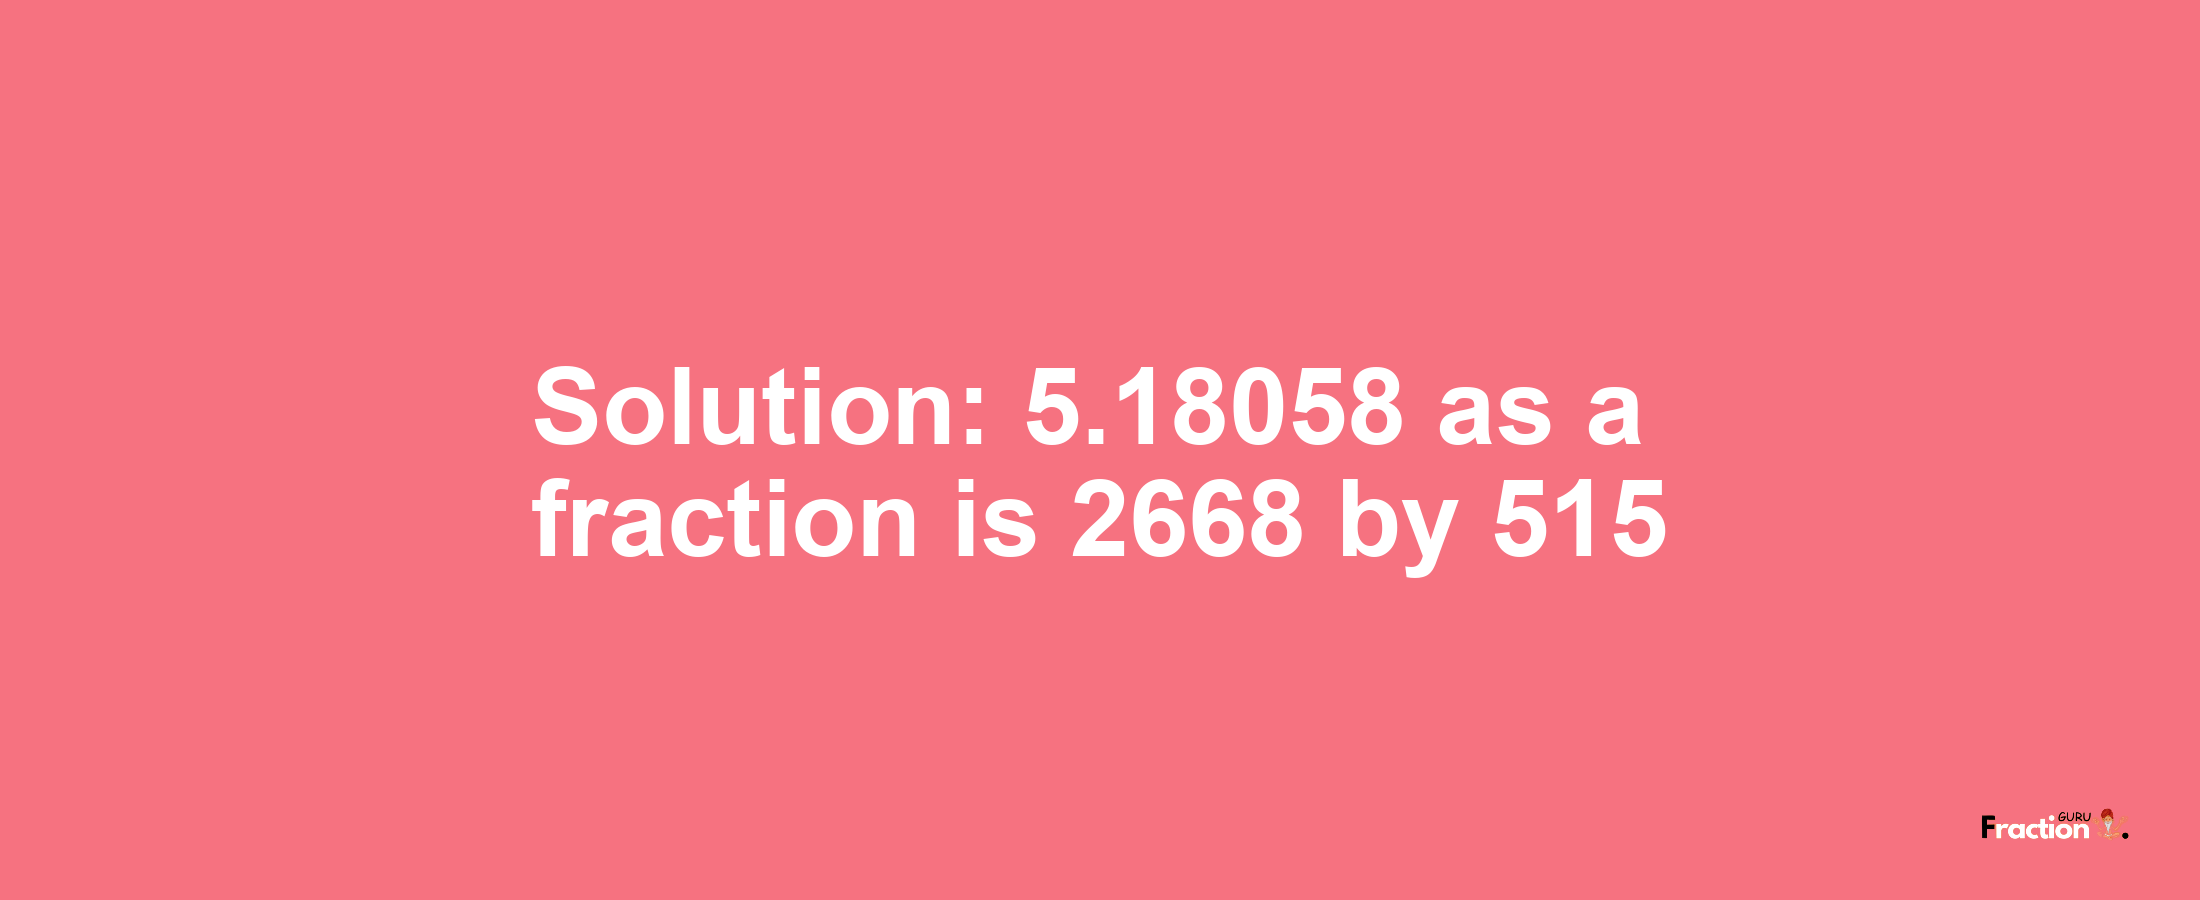 Solution:5.18058 as a fraction is 2668/515